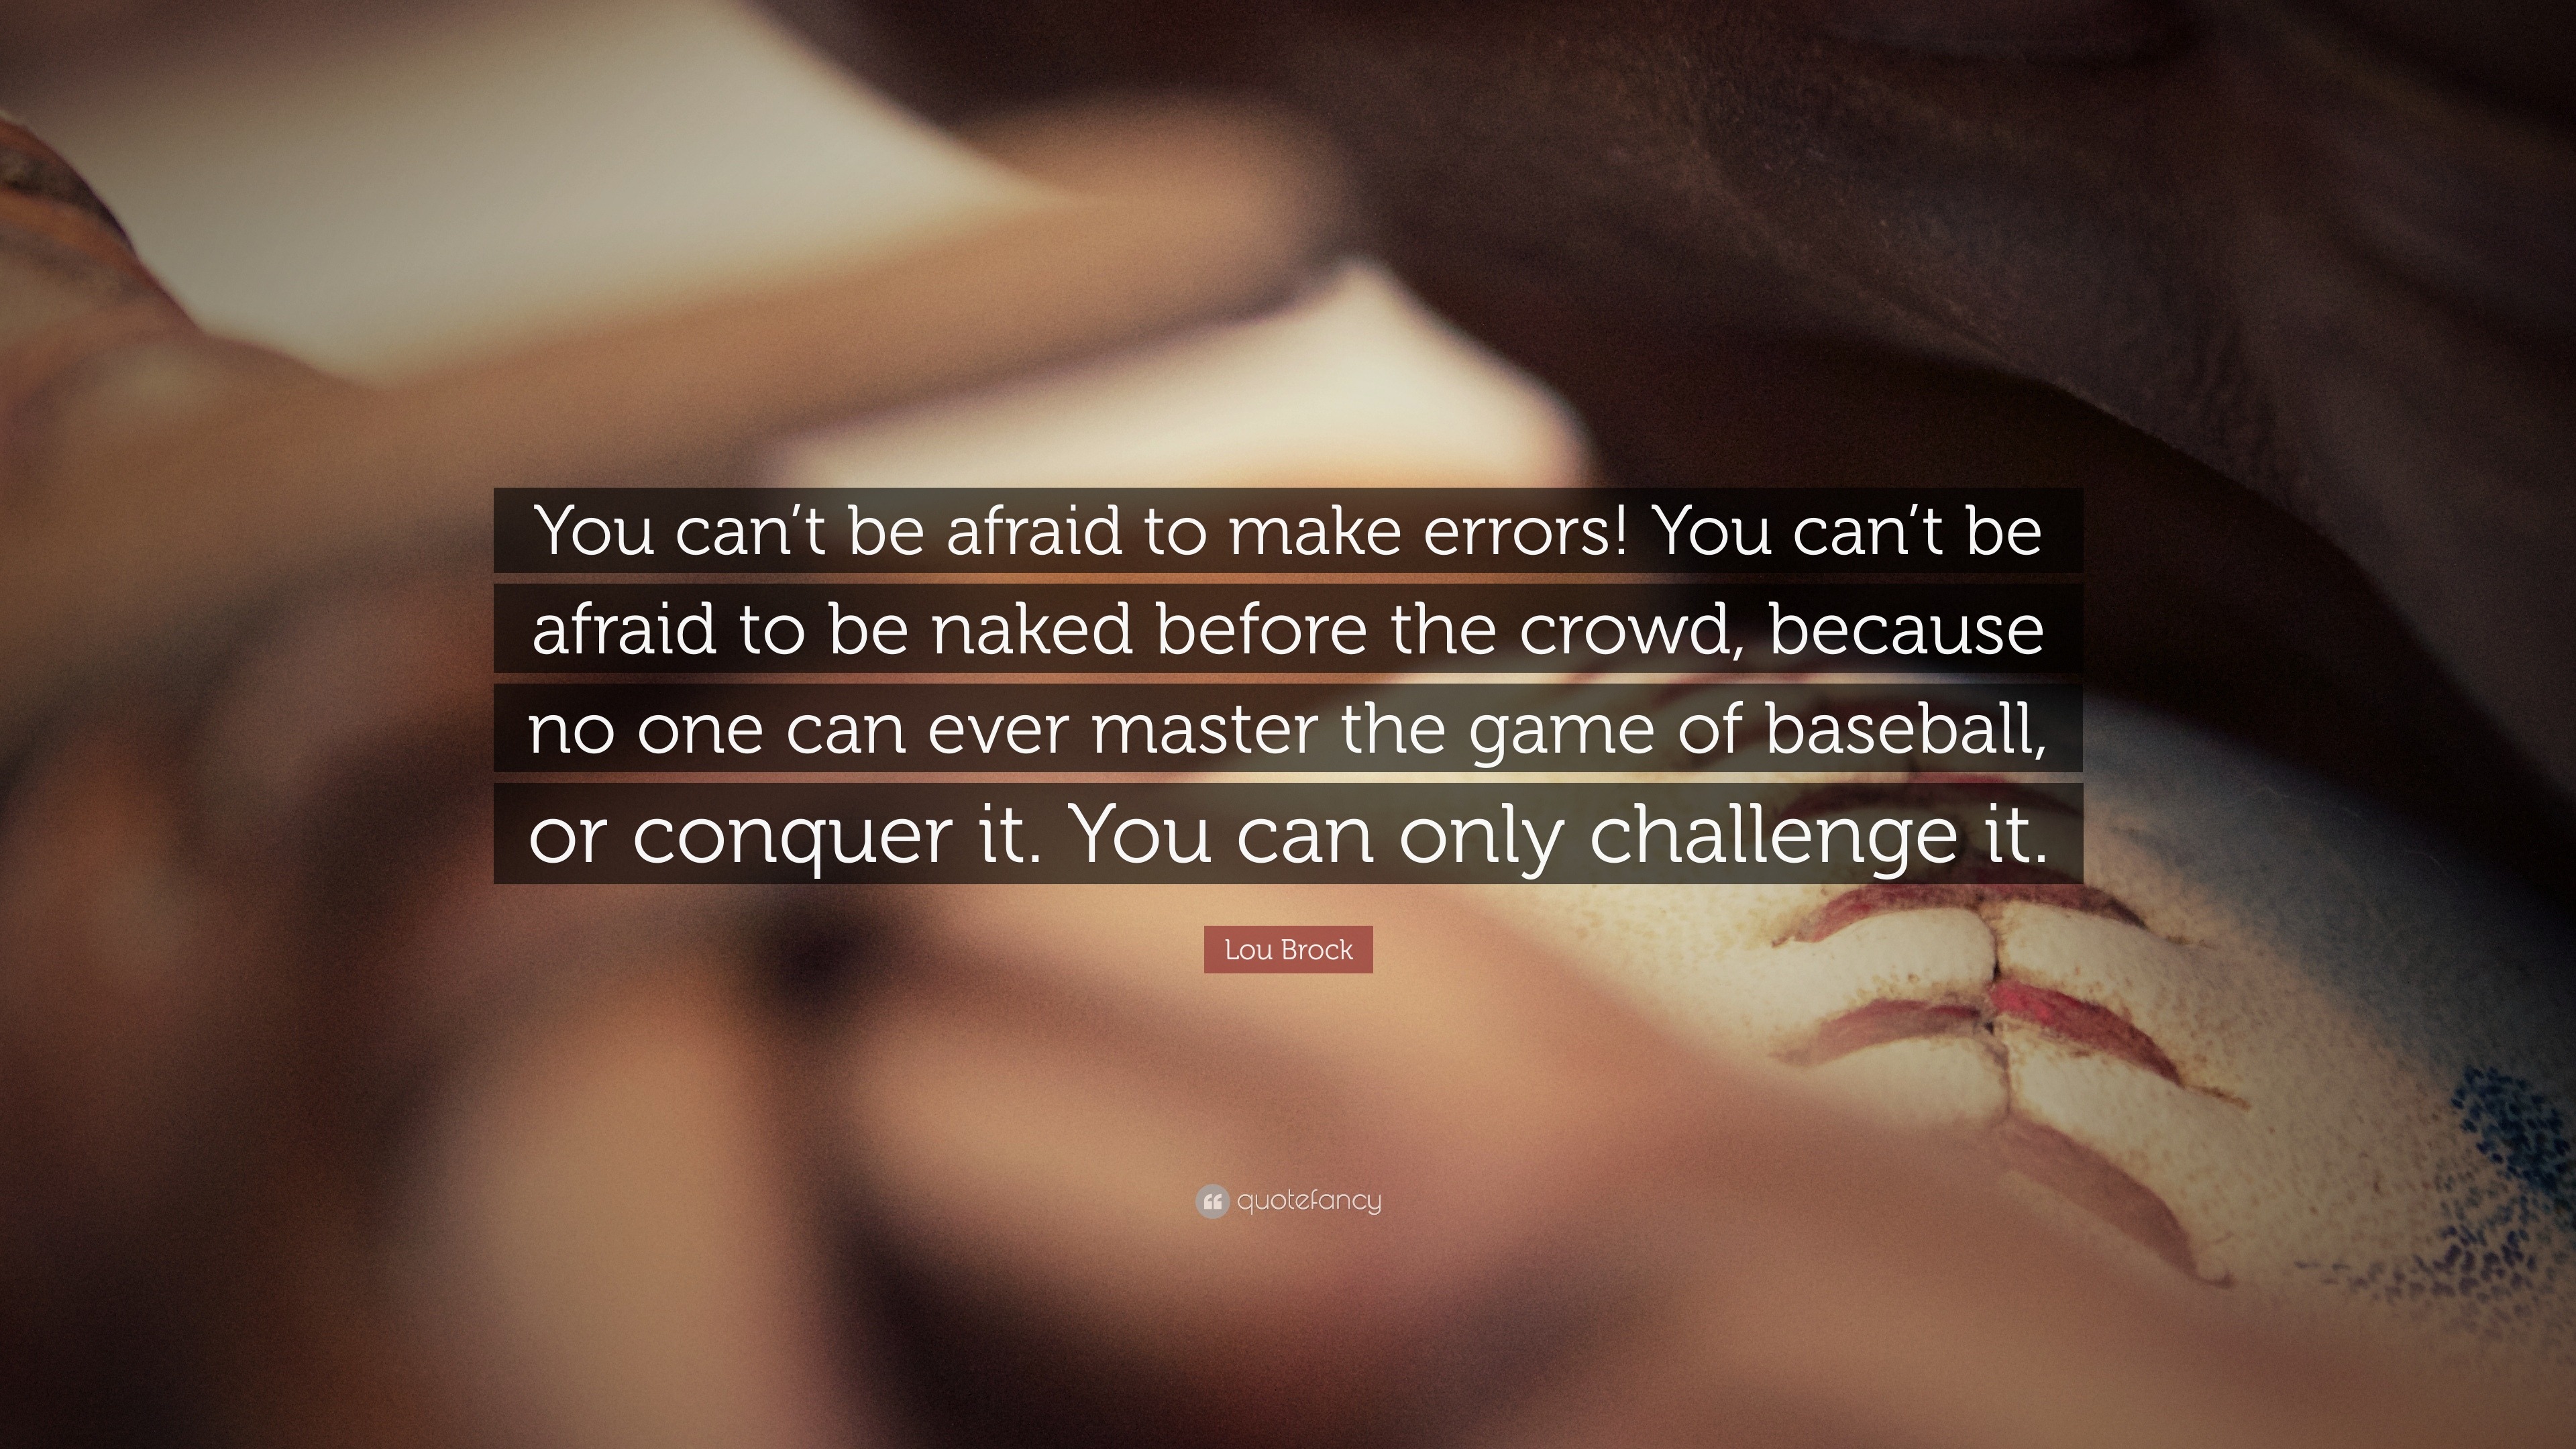 Lou Brock Quote You Cant Be Afraid To Make Errors You Cant Be Afraid To Be Naked Before The